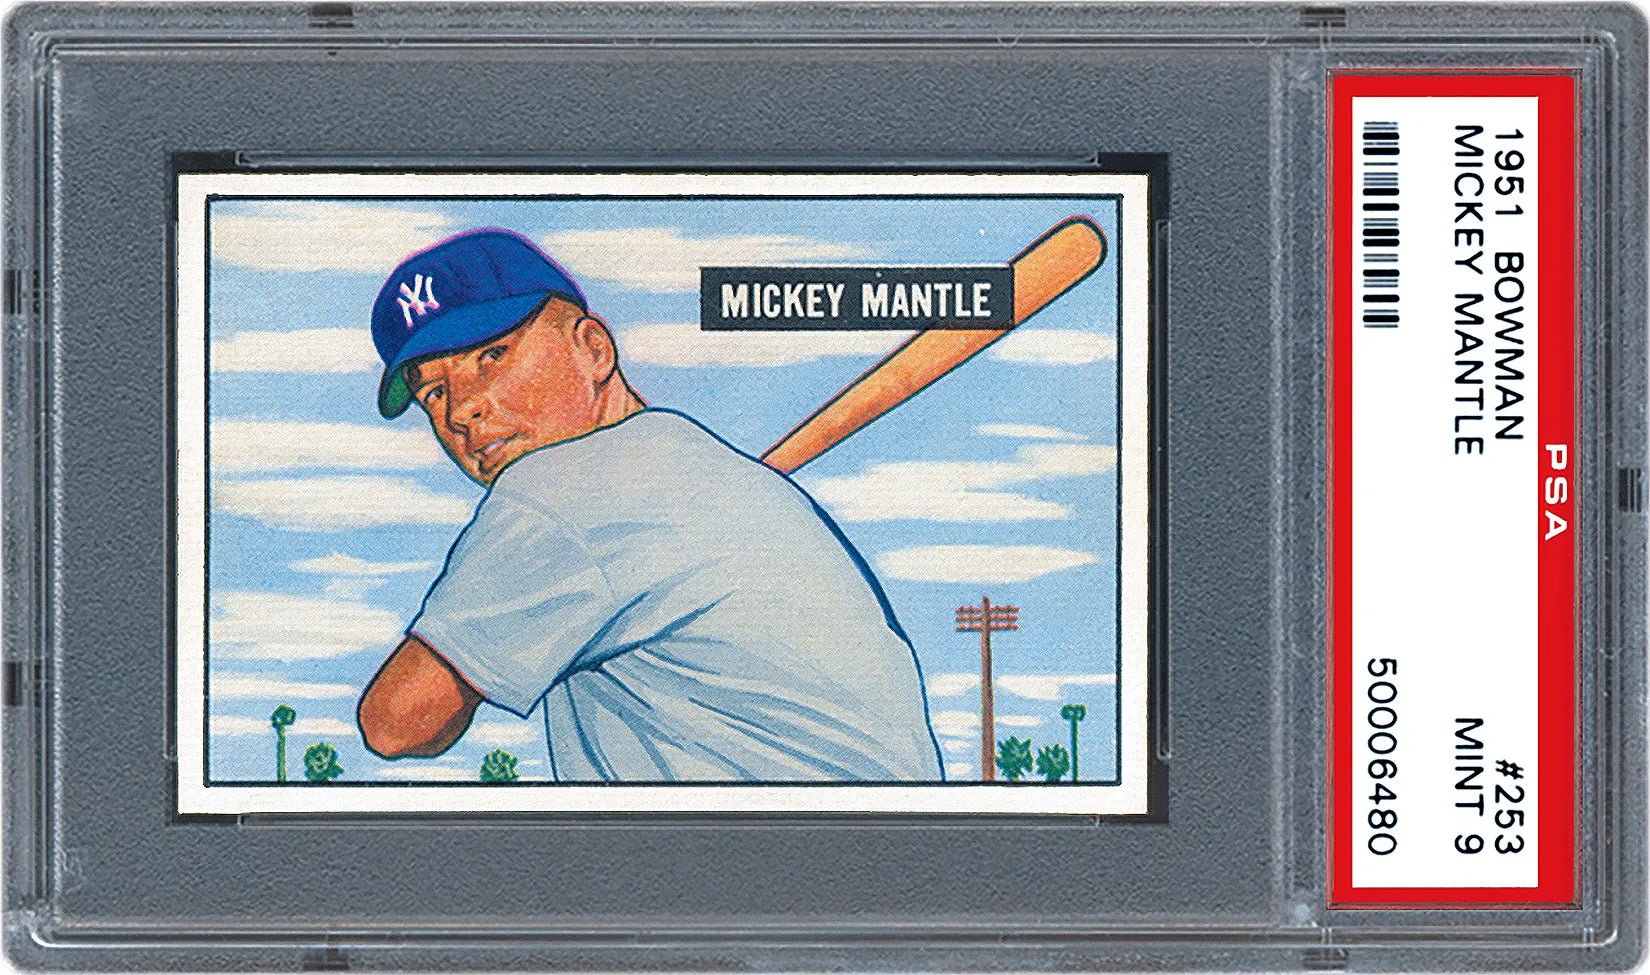 1951 Bowman Mickey Mantle Card #253 vs 1952 Topps Mickey Mantle